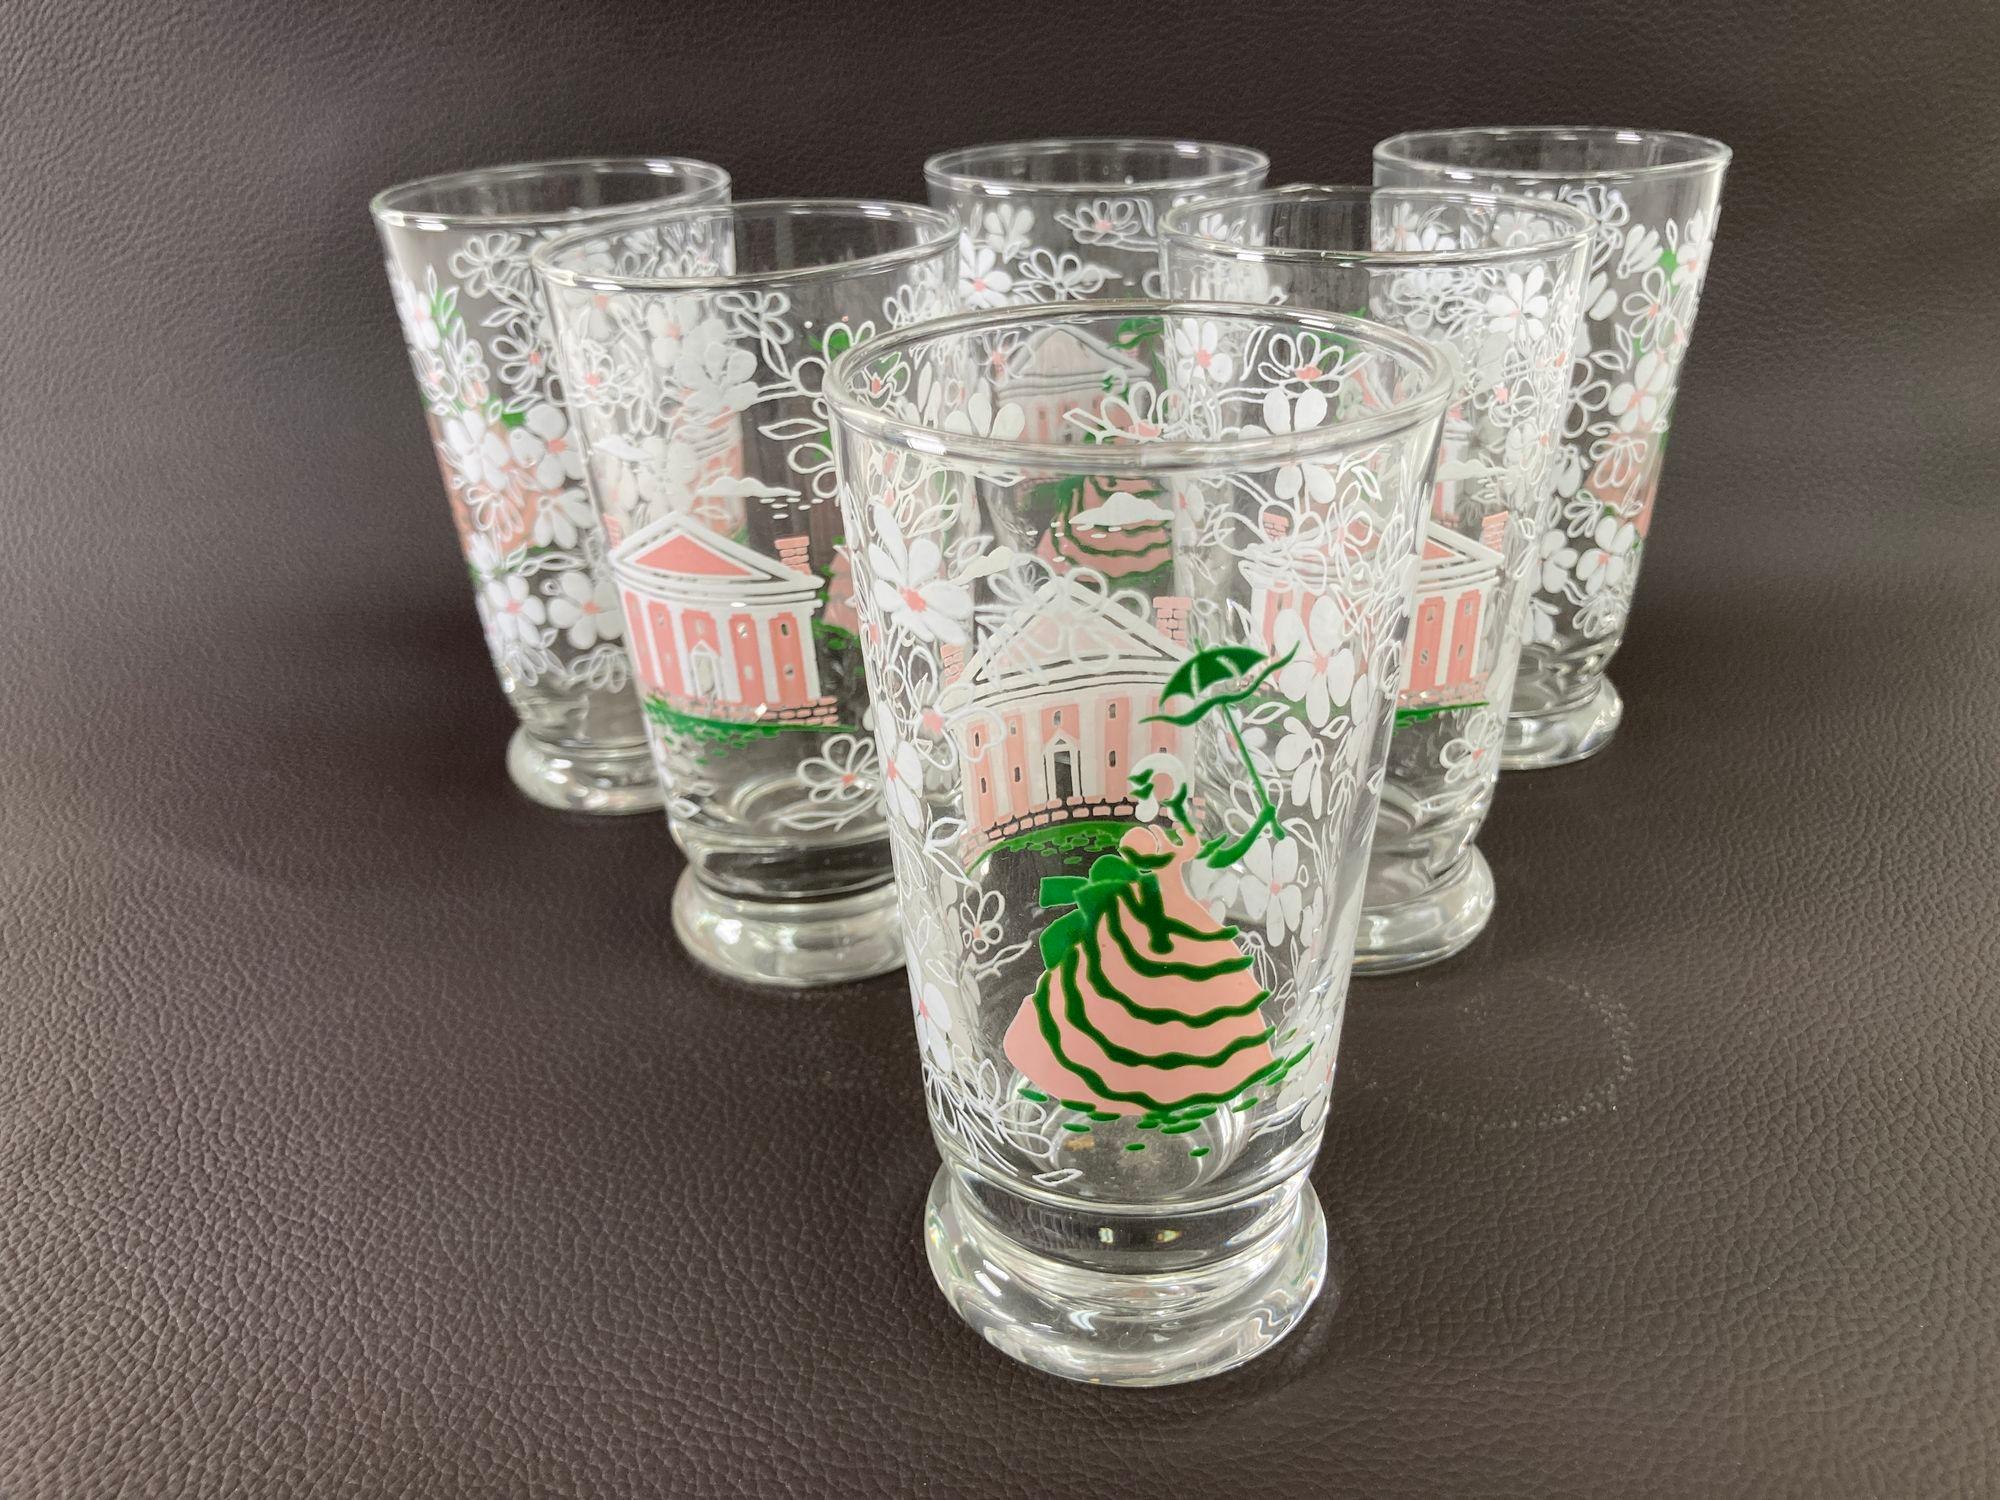 Vintage 1950s Libbey Southern Belle Magnolia Glass Tumblers Set of 6.
KENTUCKY DERBY Time LIBBEY Southern Belle Barware Collectible Glasses Mint.
Verres à boire LIBBEY 